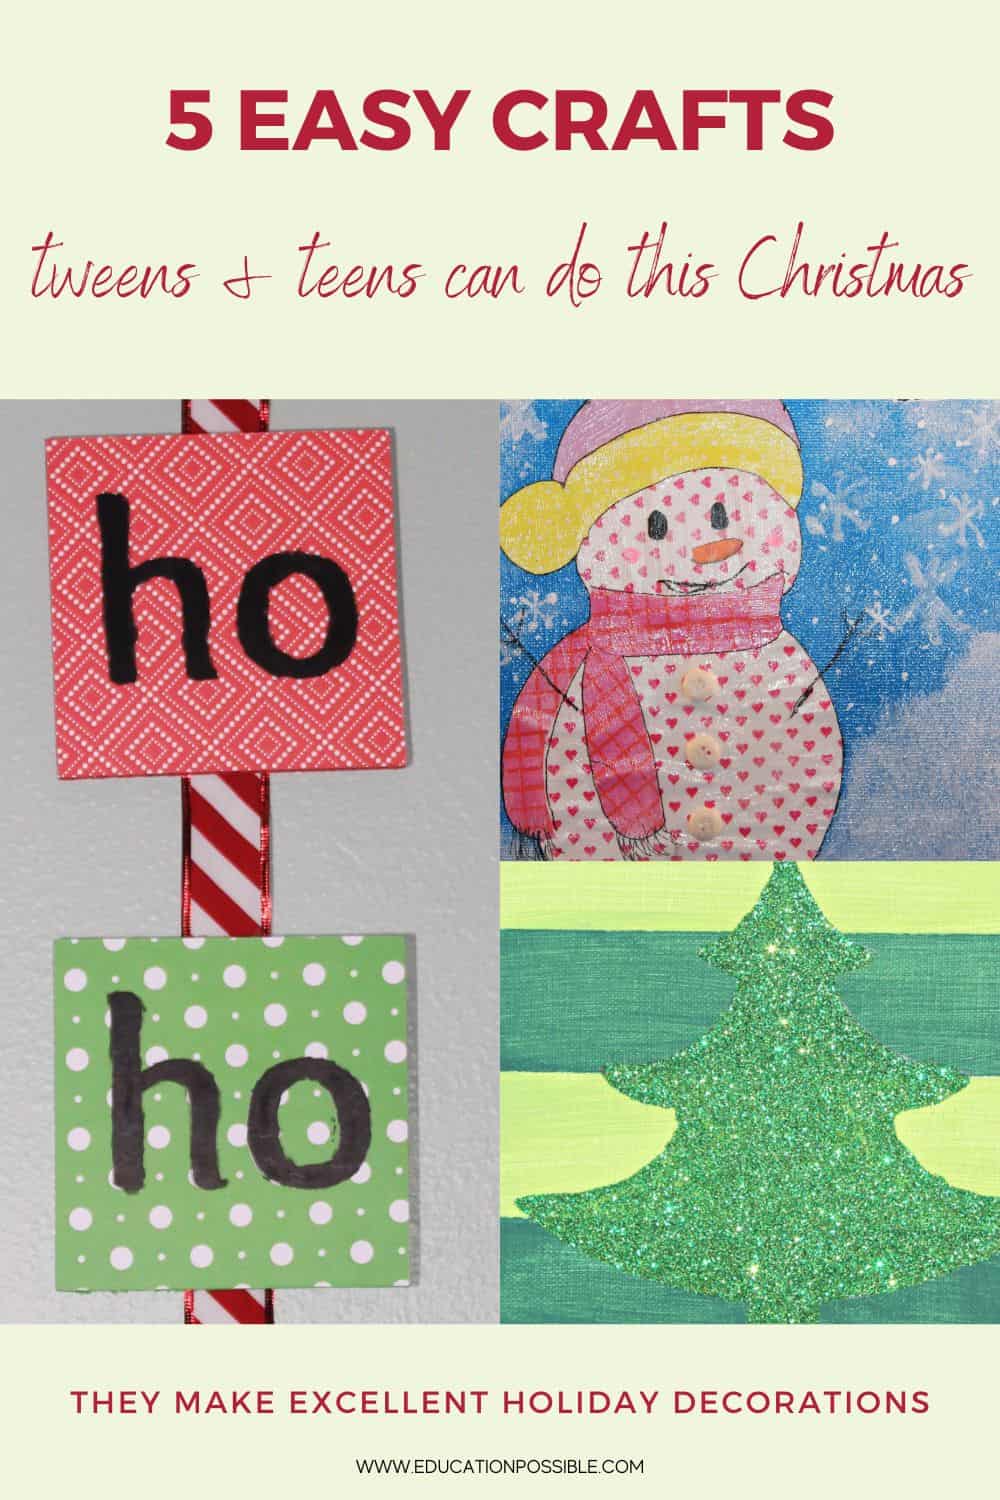 5 Easy Christmas Crafts for Teens to Make